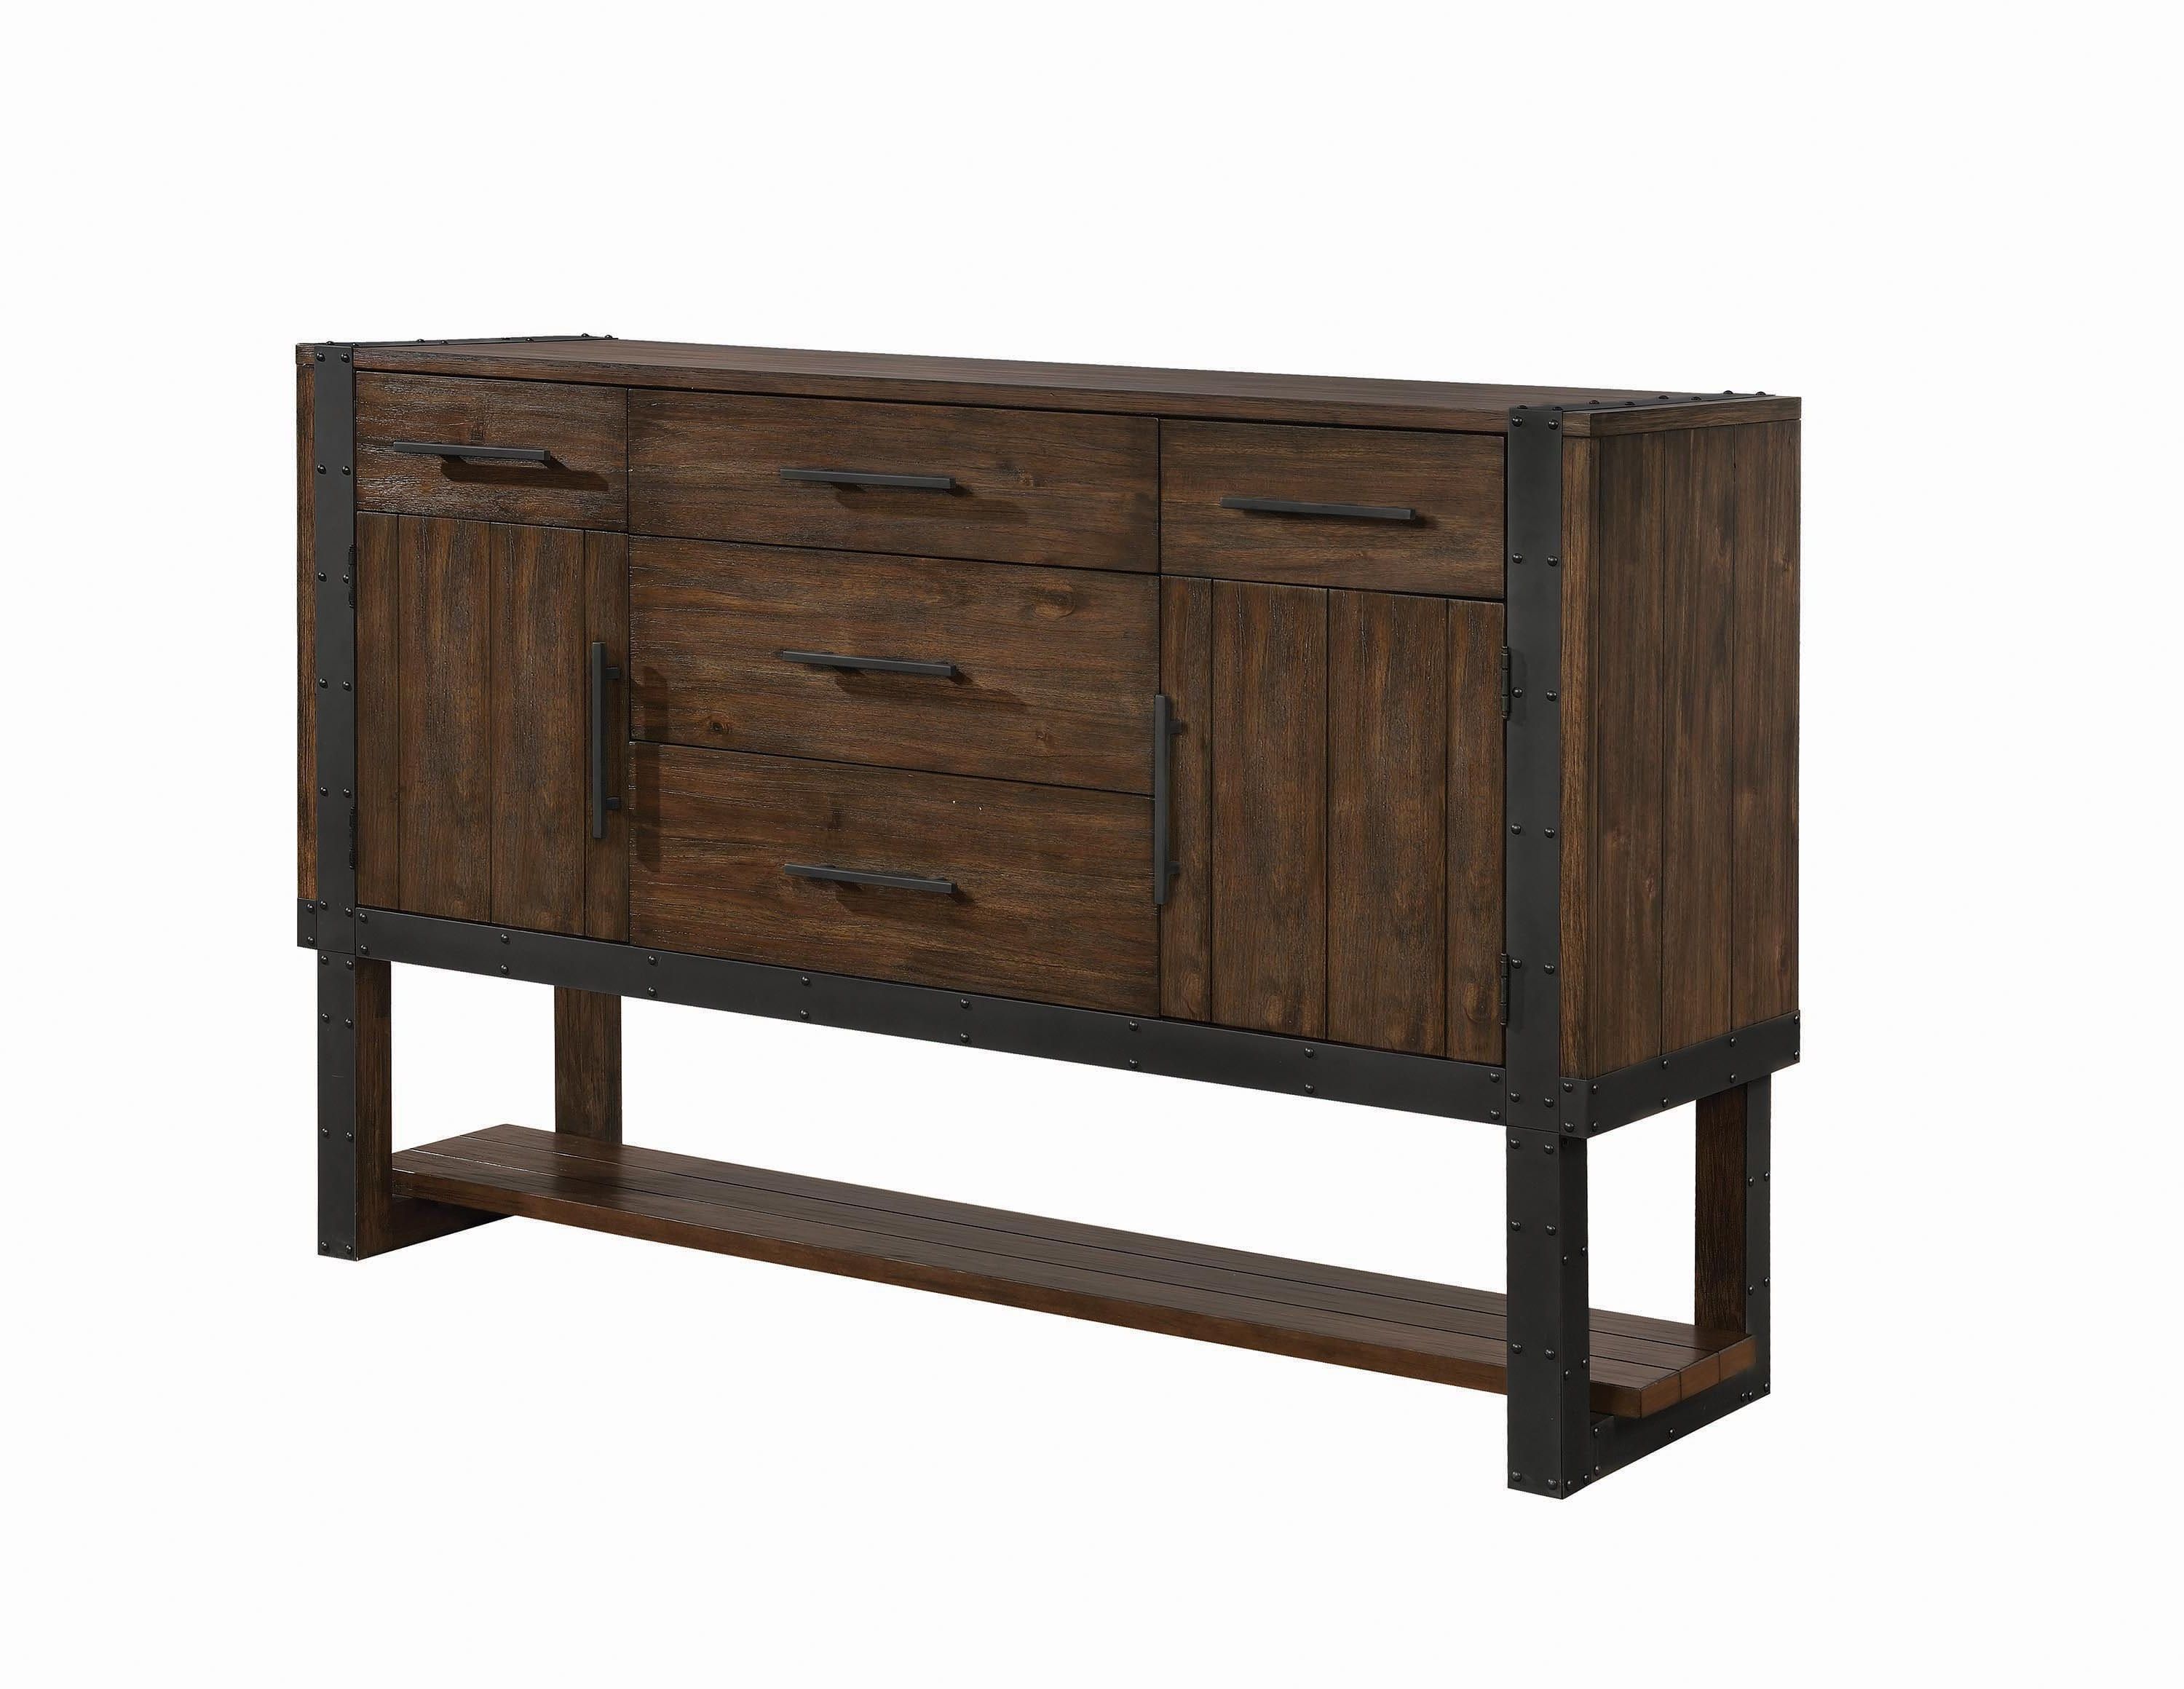 Pinparlor 430 On Hgtv D In 2019 | Coaster Furniture Intended For Thatcher Sideboards (Gallery 7 of 20)